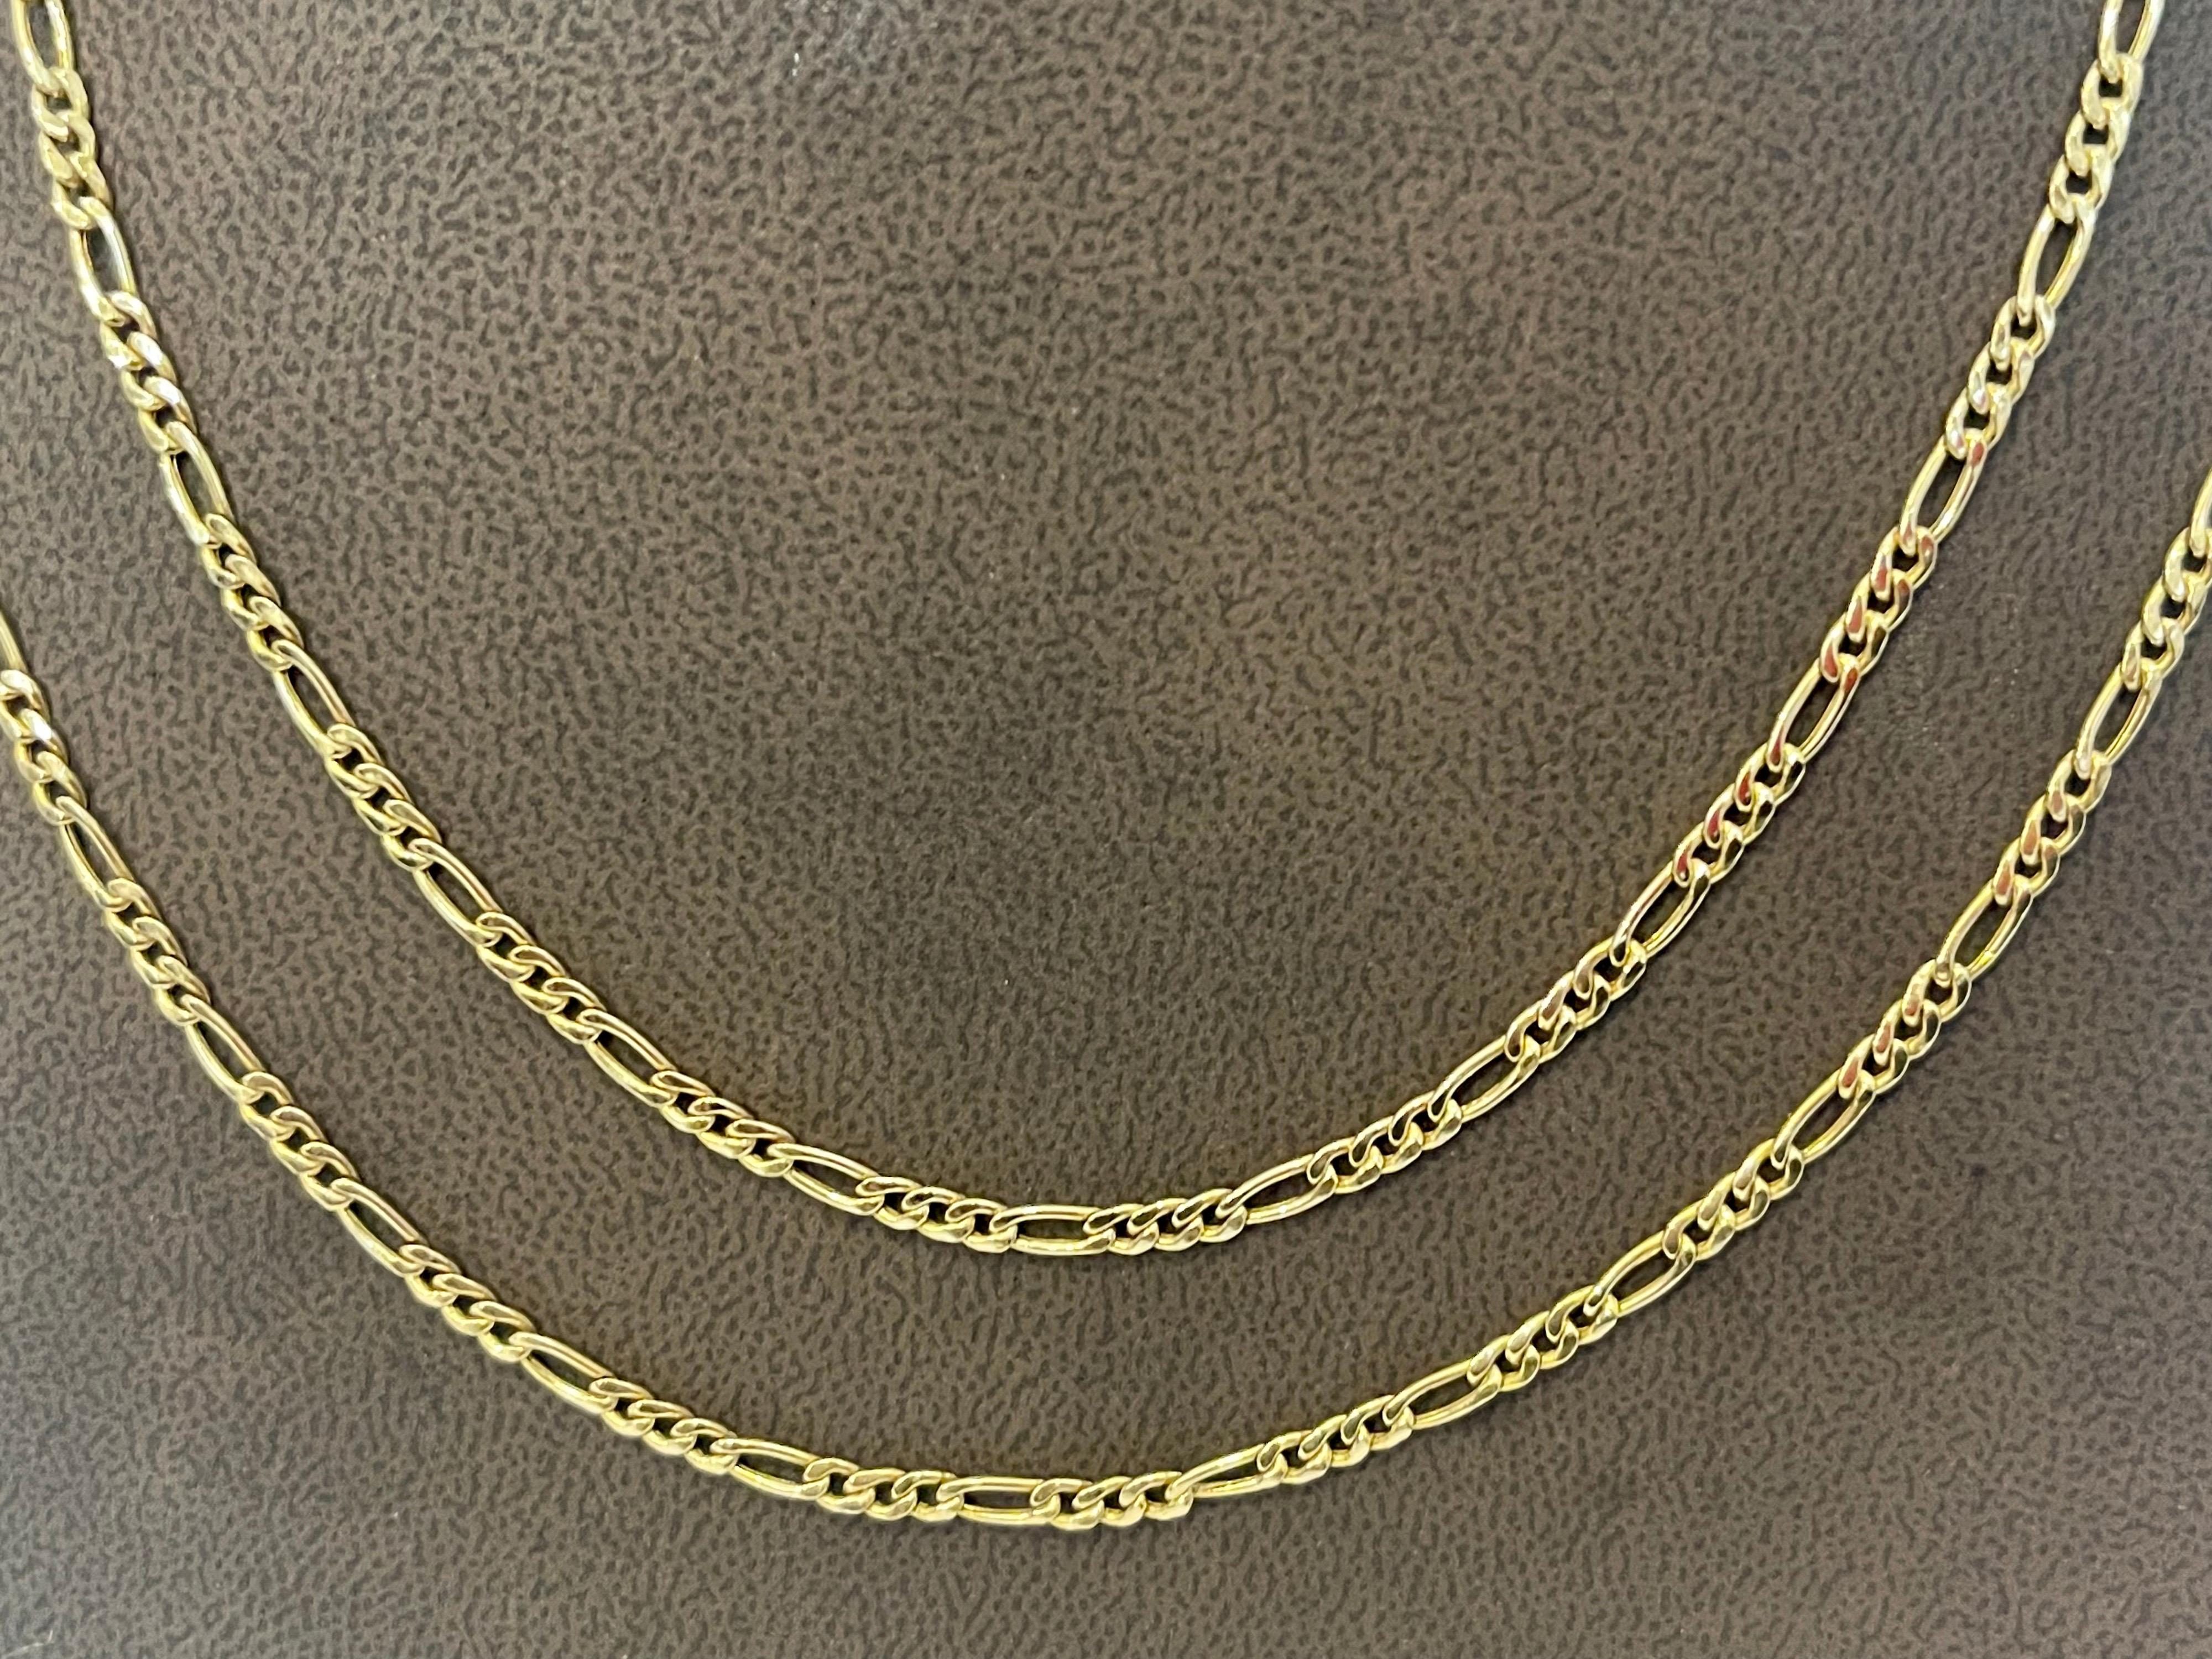 Vintage 14 Karat Yellow Gold 4 Gm Figaro Chain Necklace In Excellent Condition For Sale In New York, NY